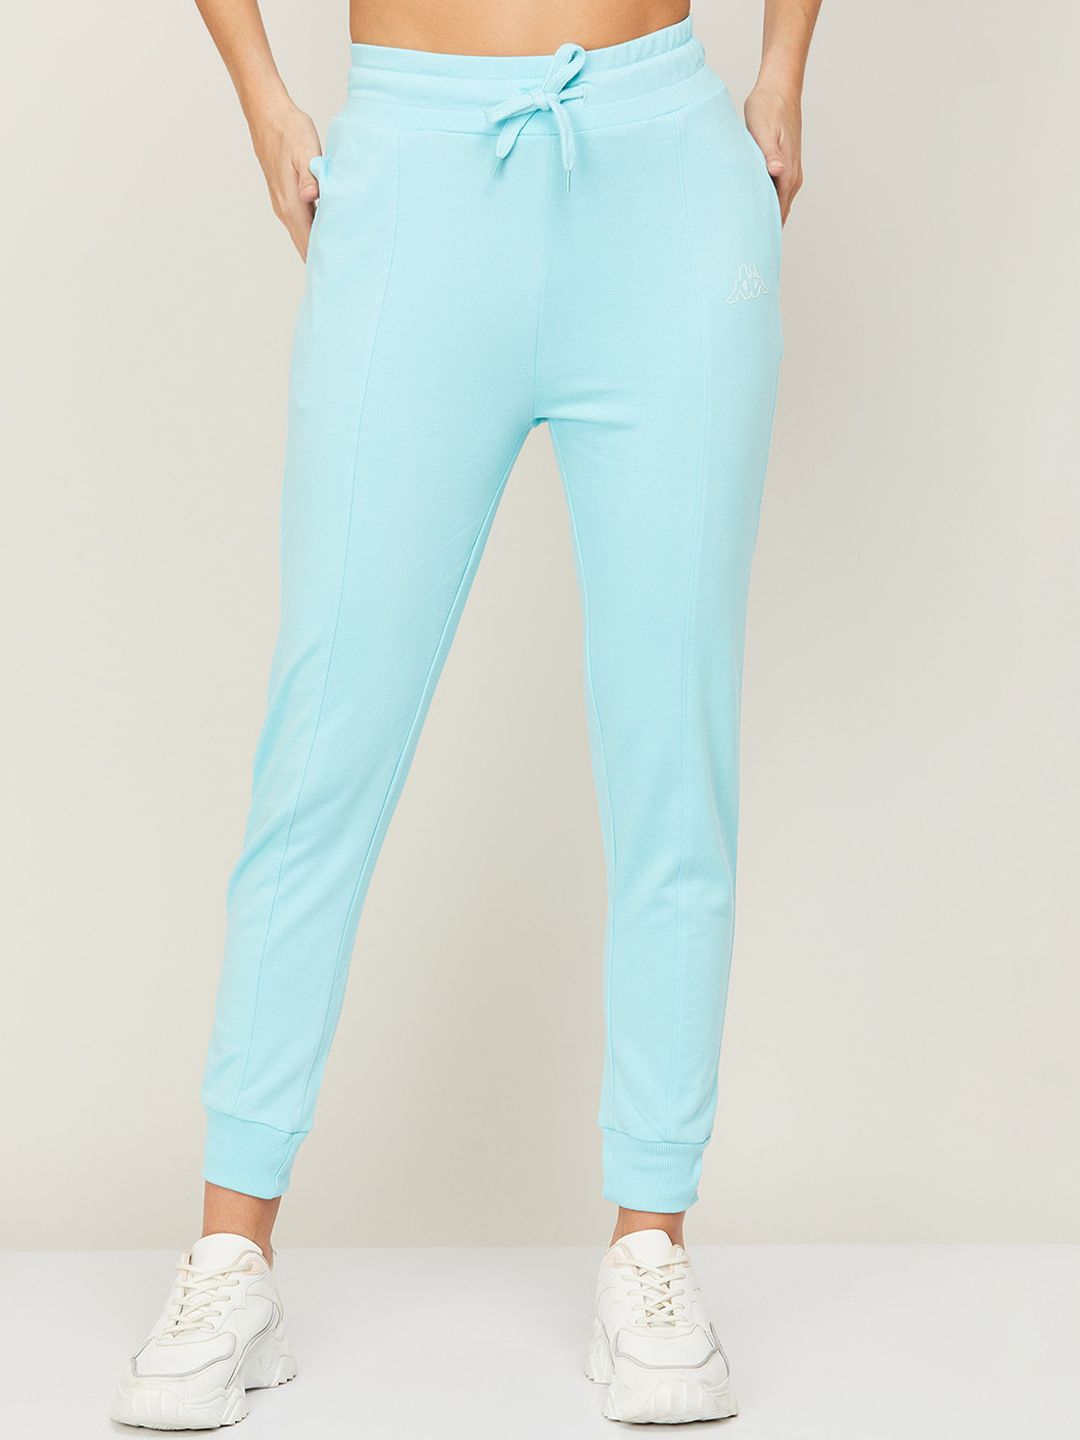 Kappa Women Blue Solid Cotton Joggers Price in India